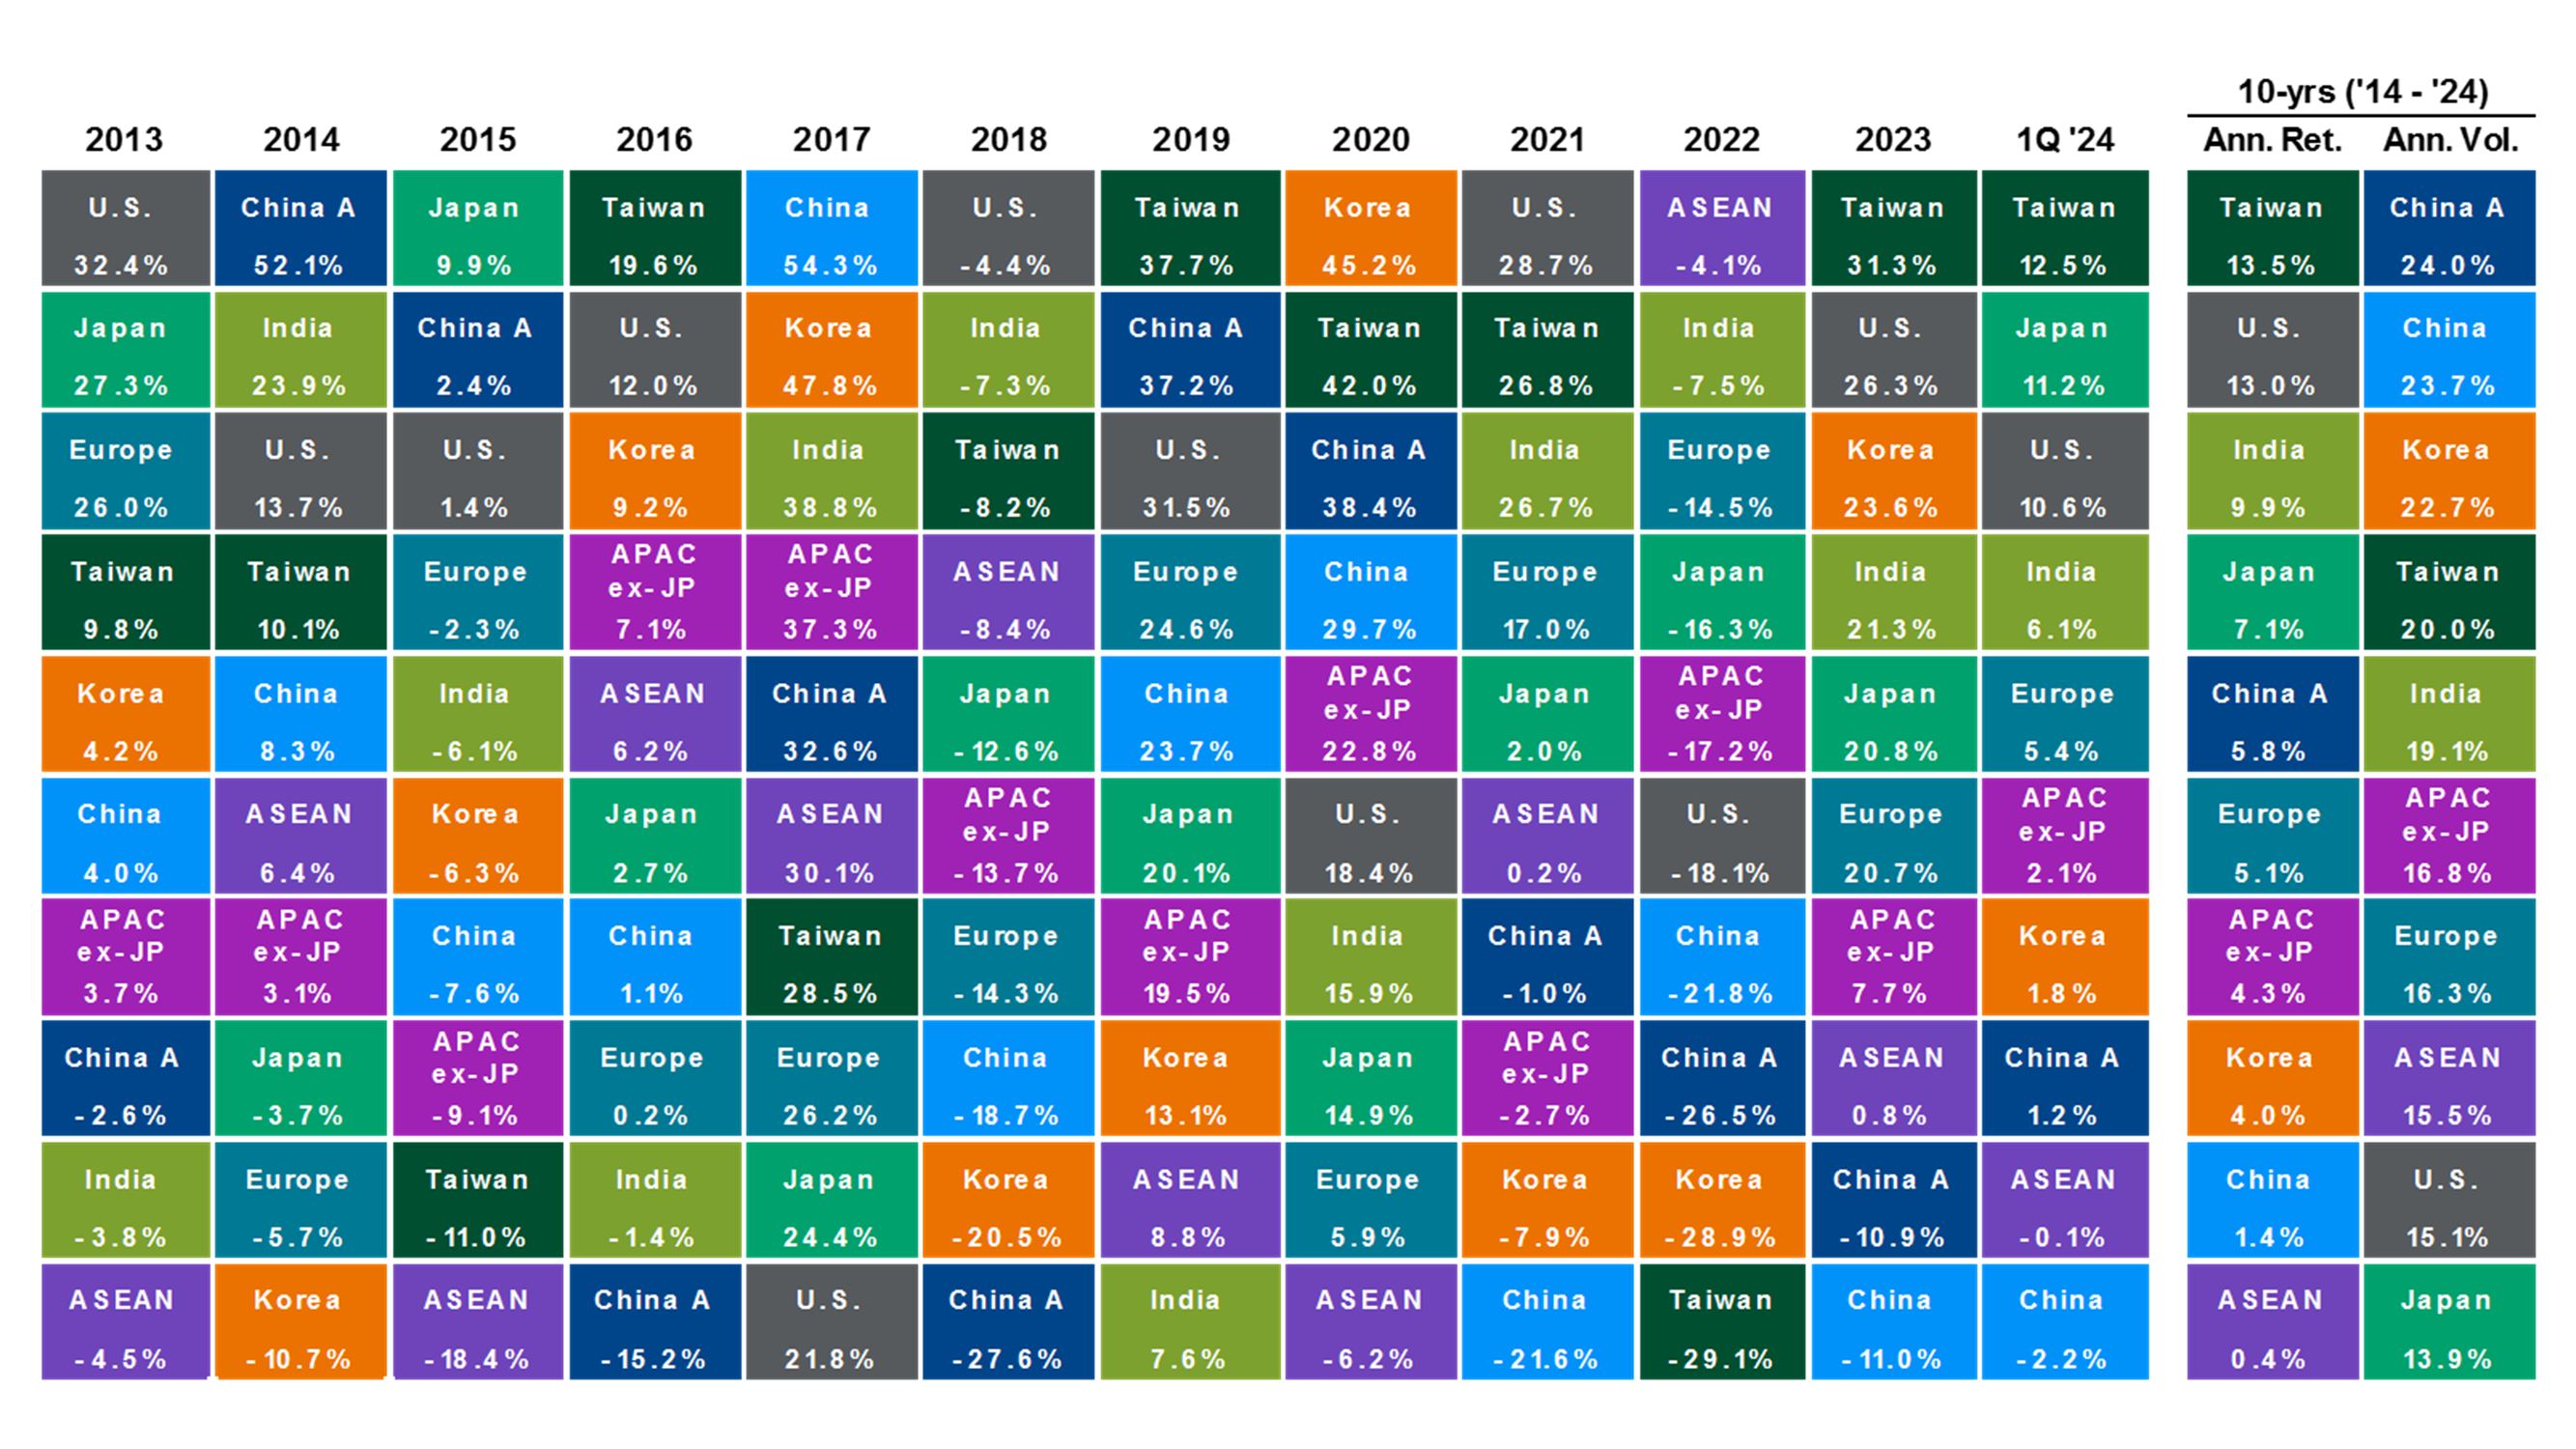 Global equities: Earnings expectations